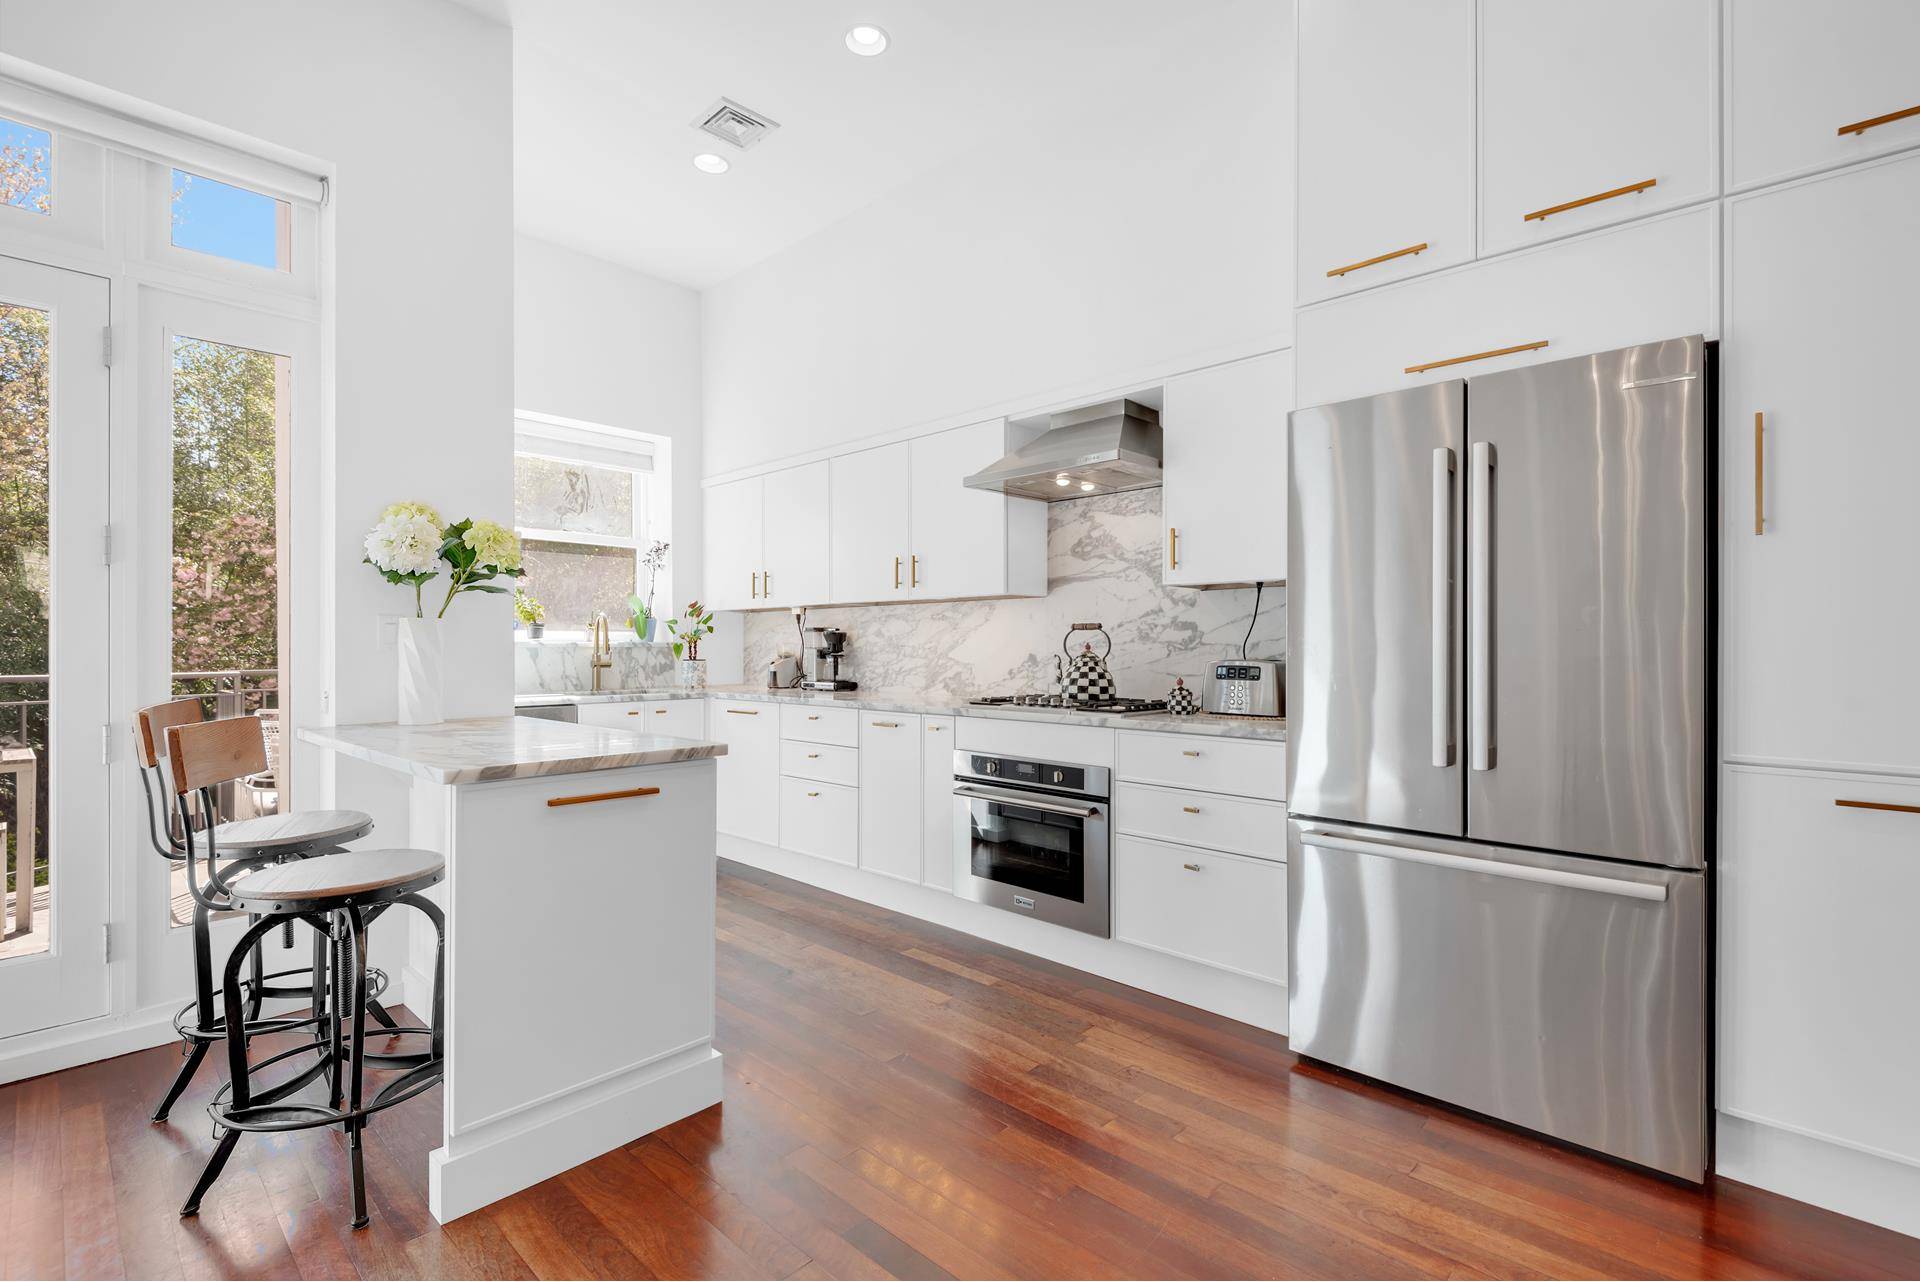 Experience the pinnacle of townhouse living within the heart of coveted Park Slope with this remarkable Garden Triplex.